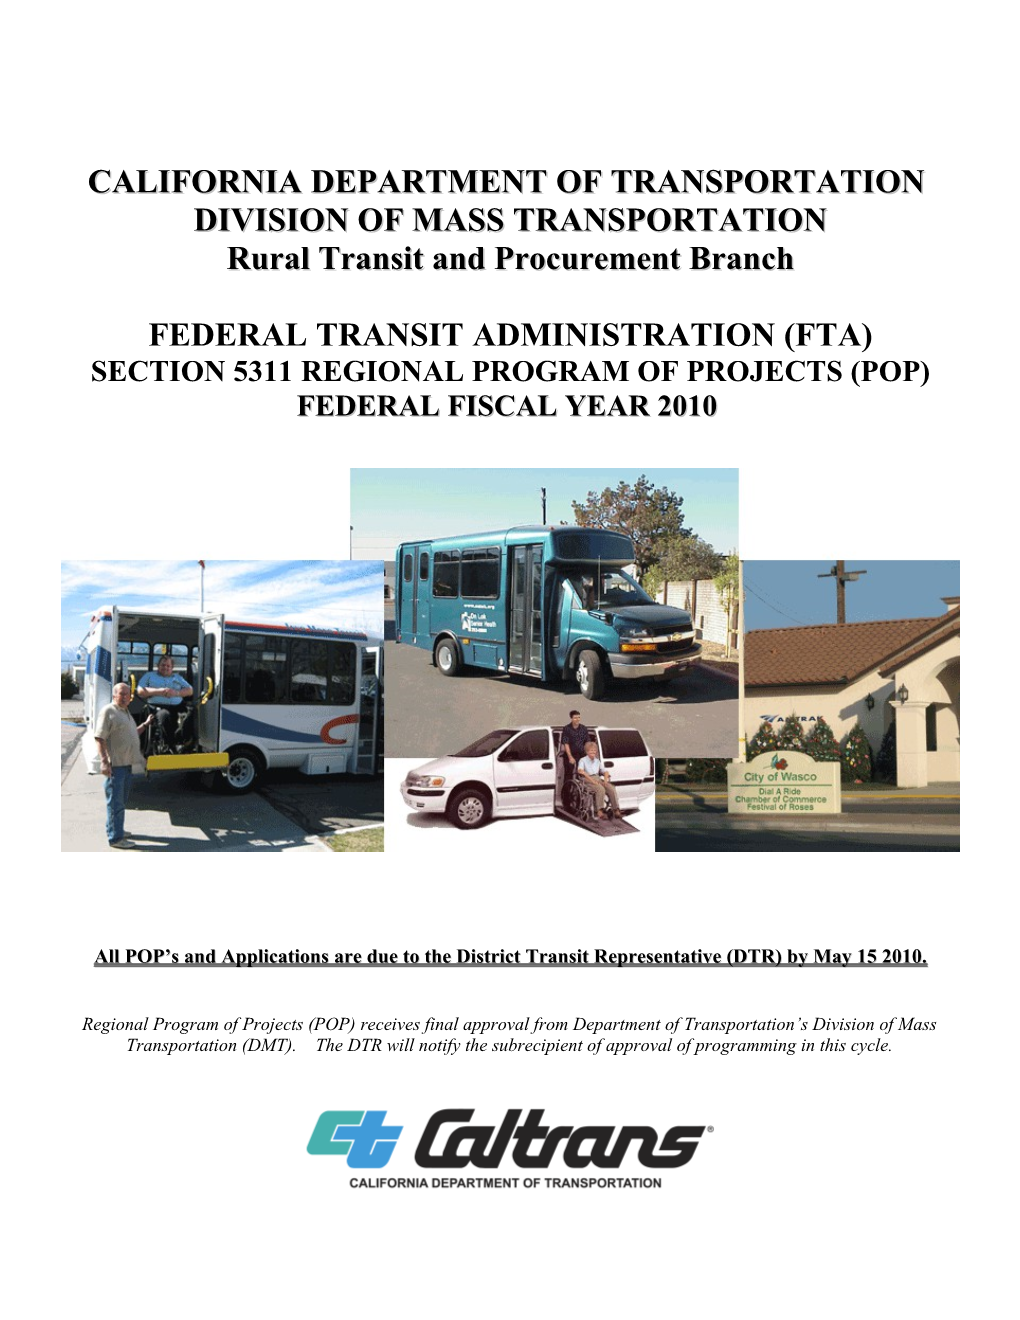 Regional Program of Projects (POP) Receives Final Approval from Department of Transportation